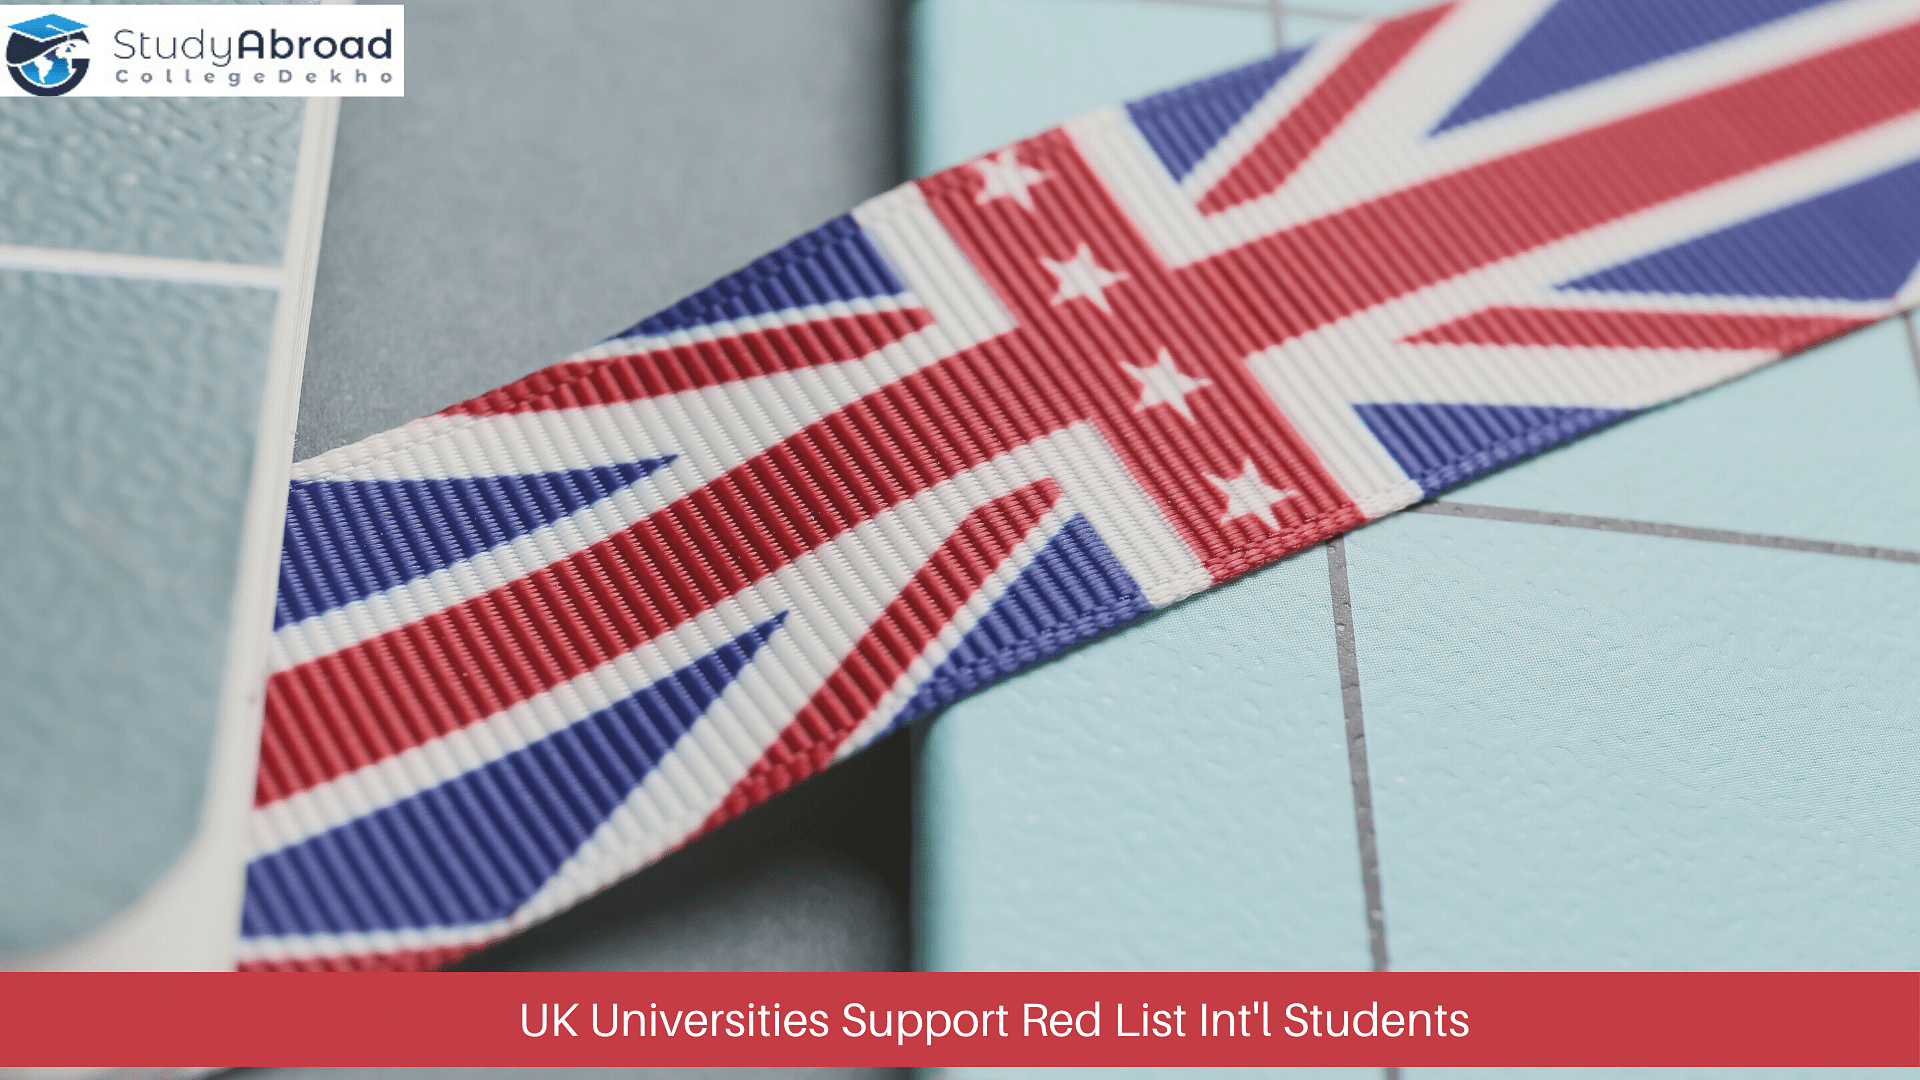 UK Universities Support Red List Int'l Students